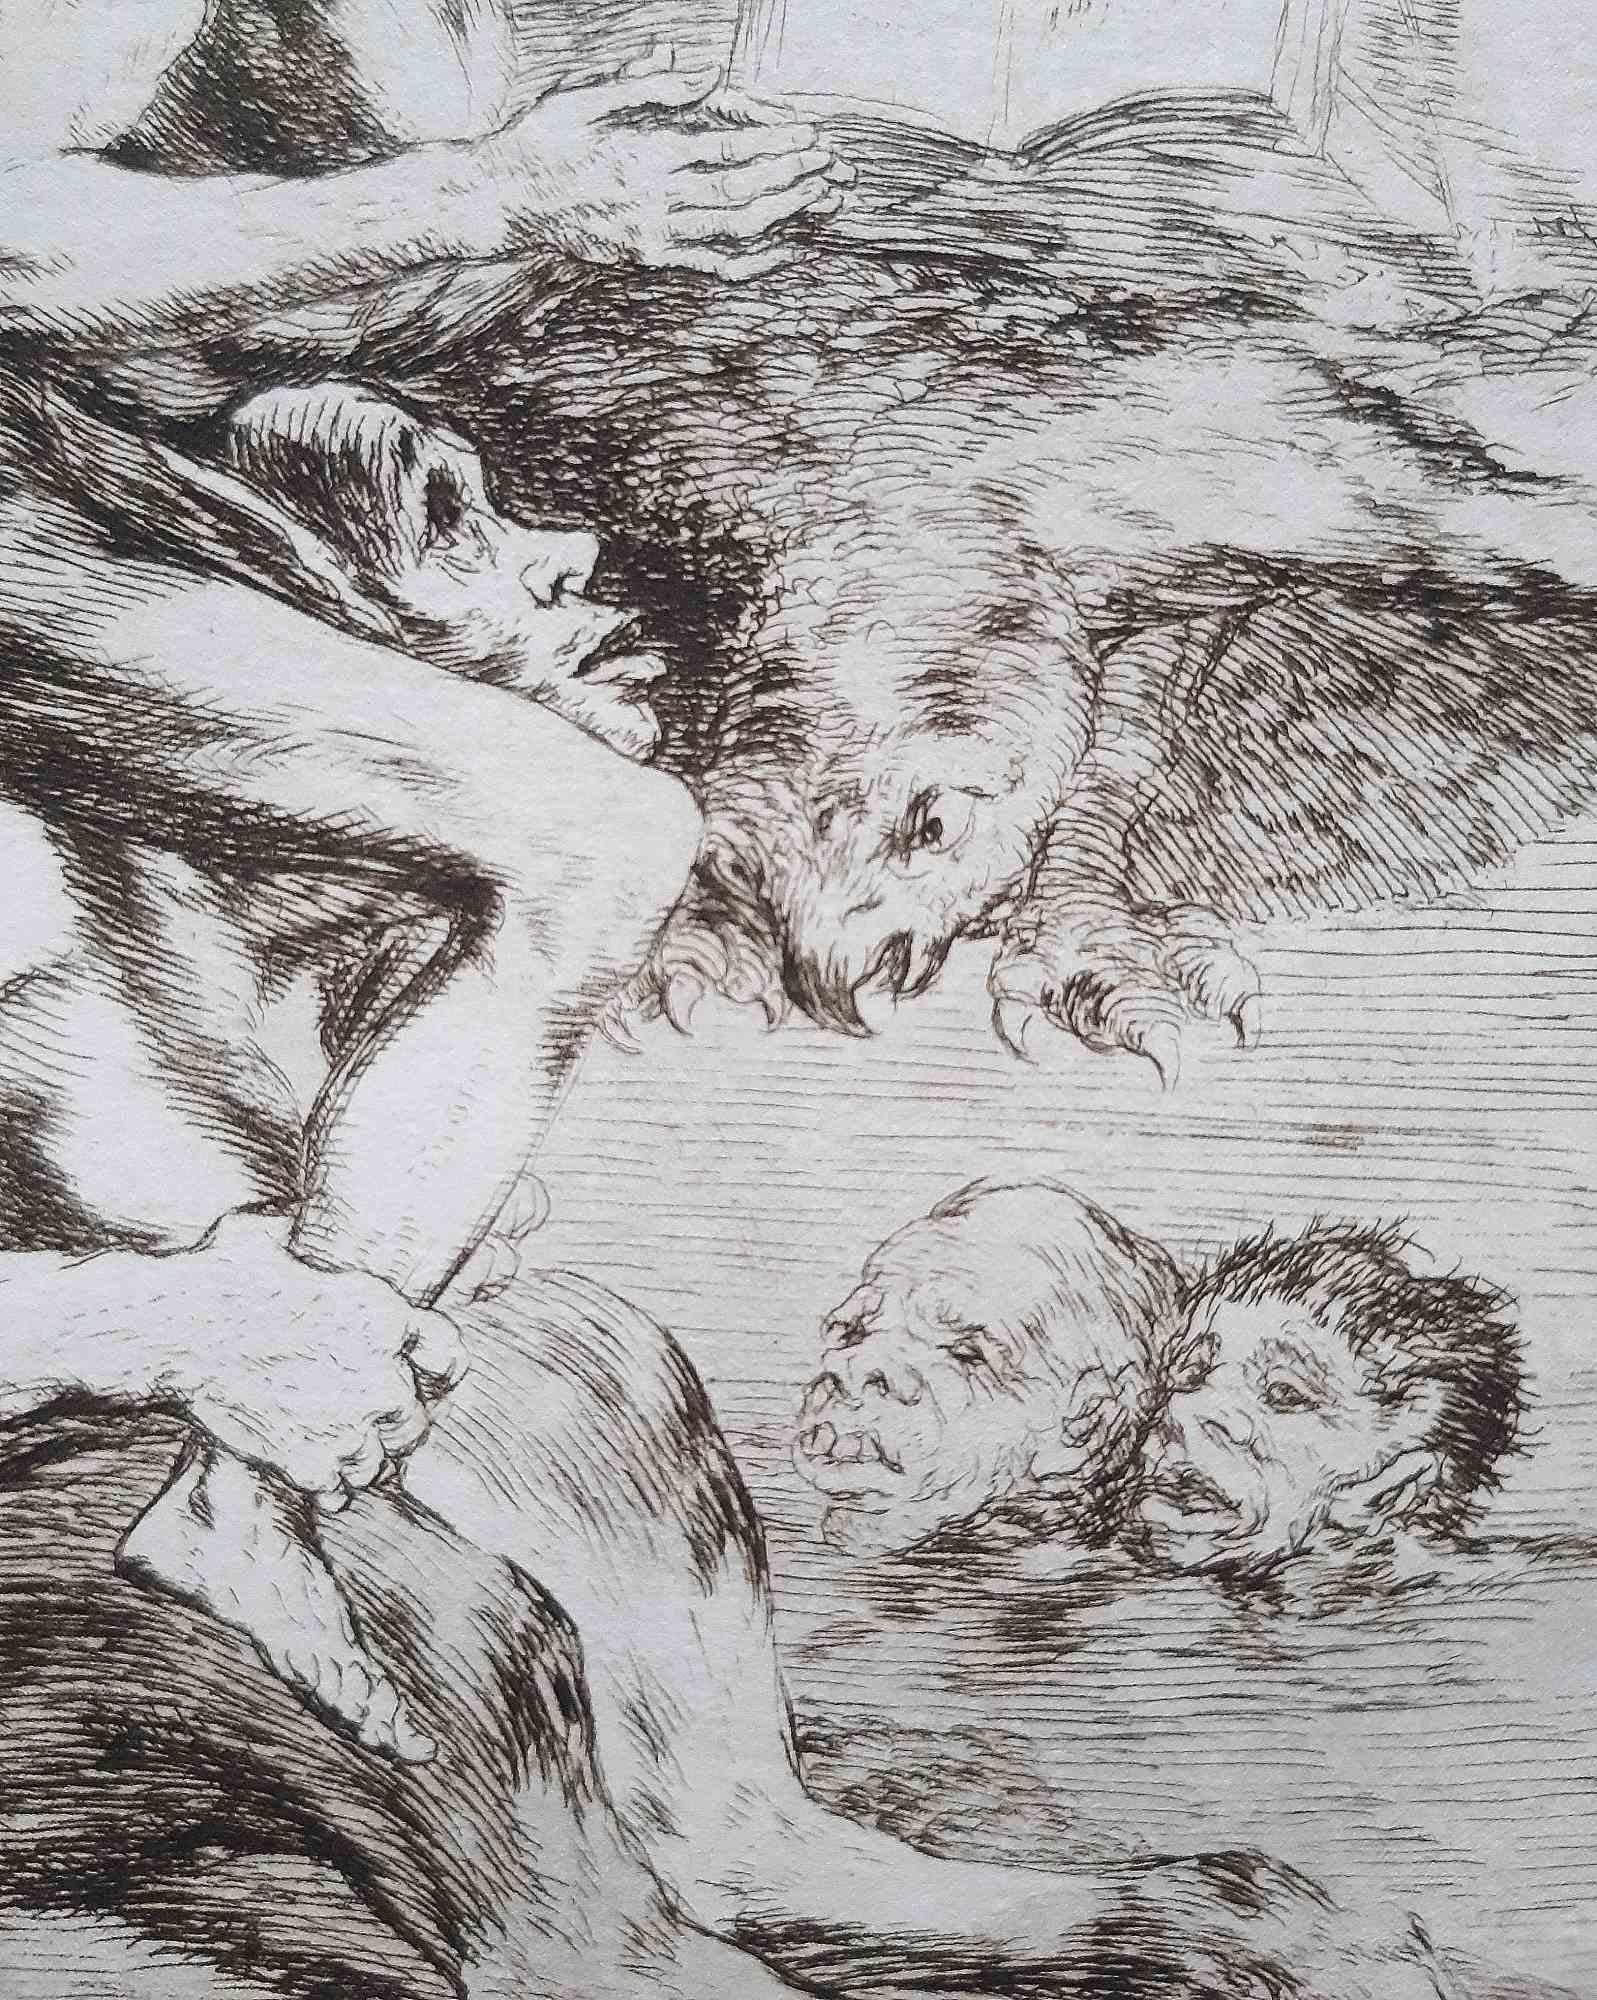 Devota profesion from Los Caprichos is an original artwork realized by the artist Francisco Goya and published for the first time in 1799.

Etching and aquatint on paper.

The etching is part of the First Edition of 